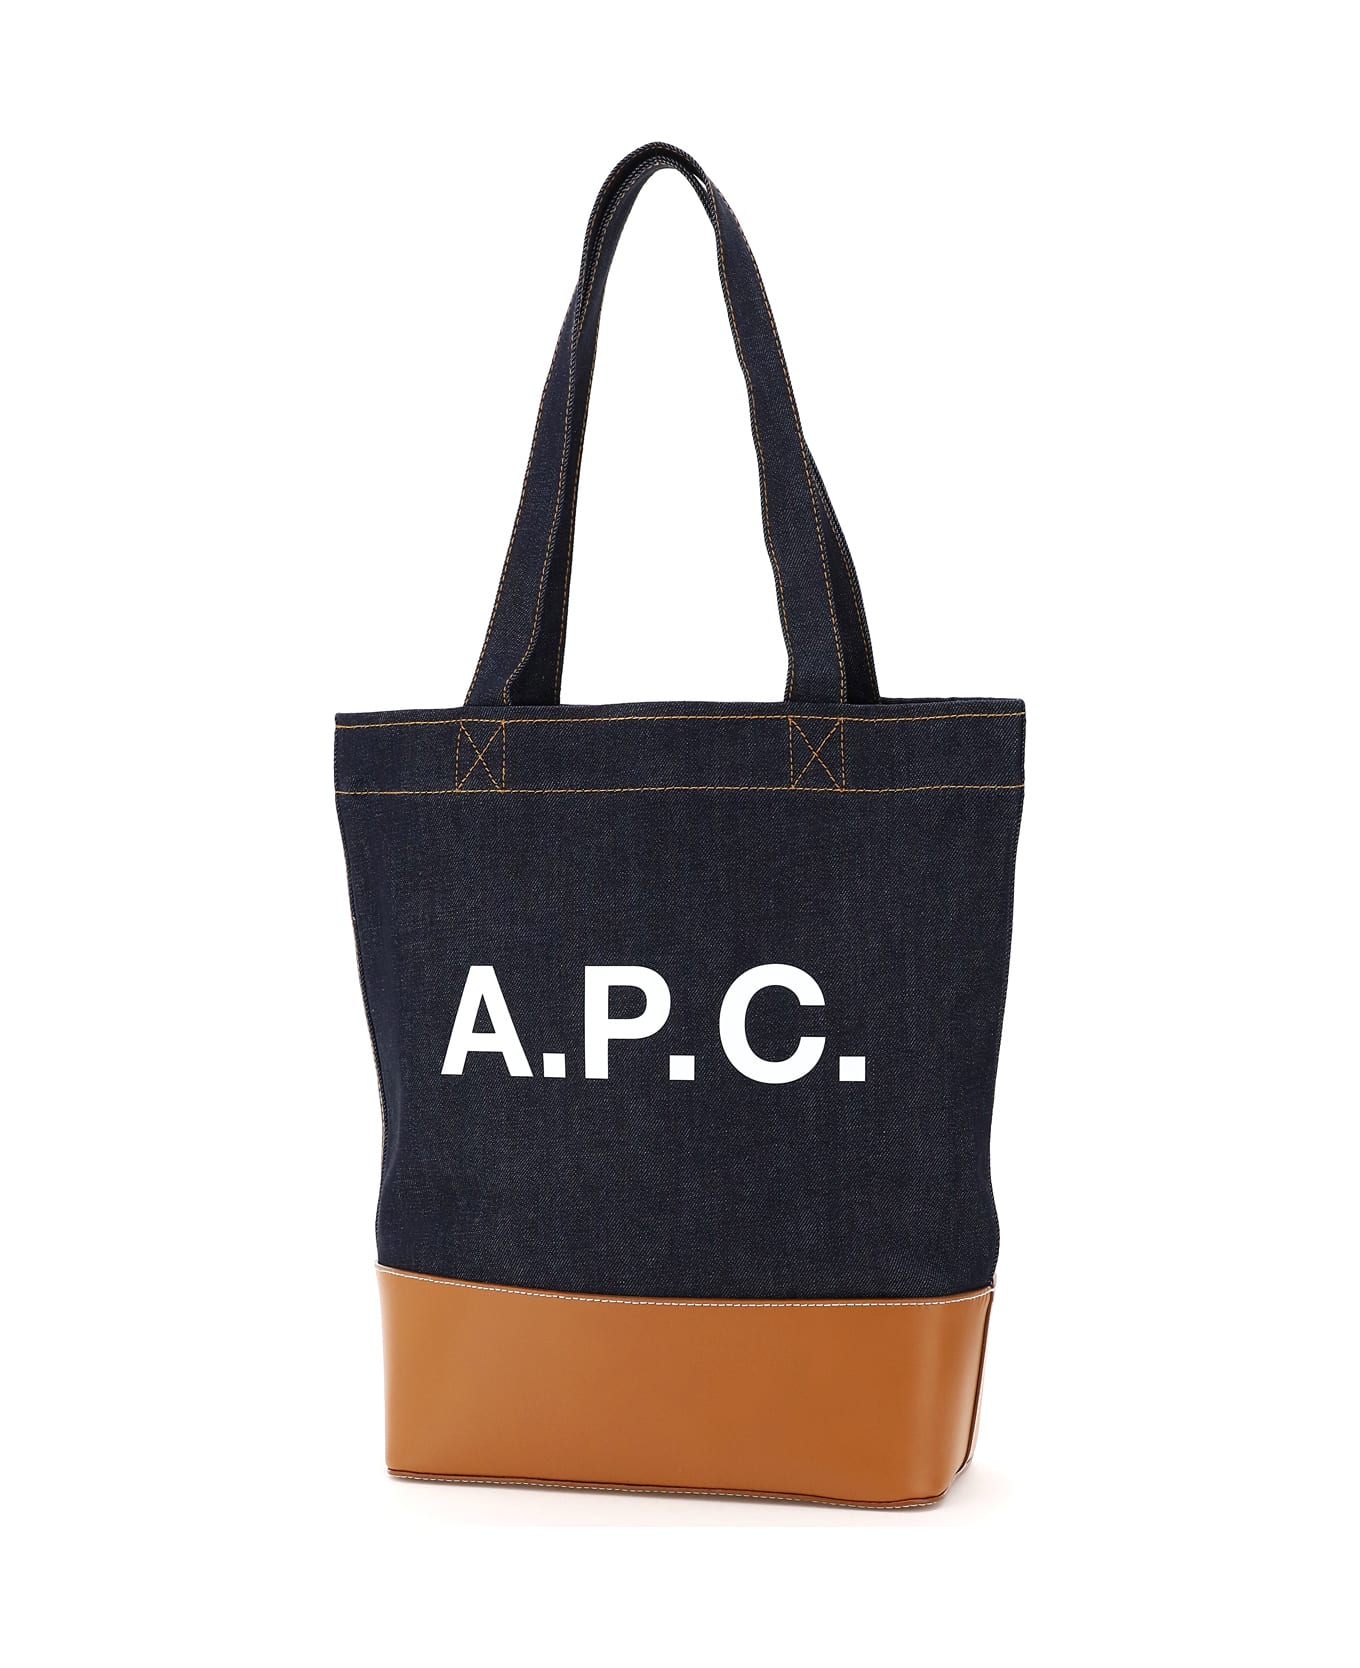 A.P.C. Axelle Tote Bag - Brown トートバッグ